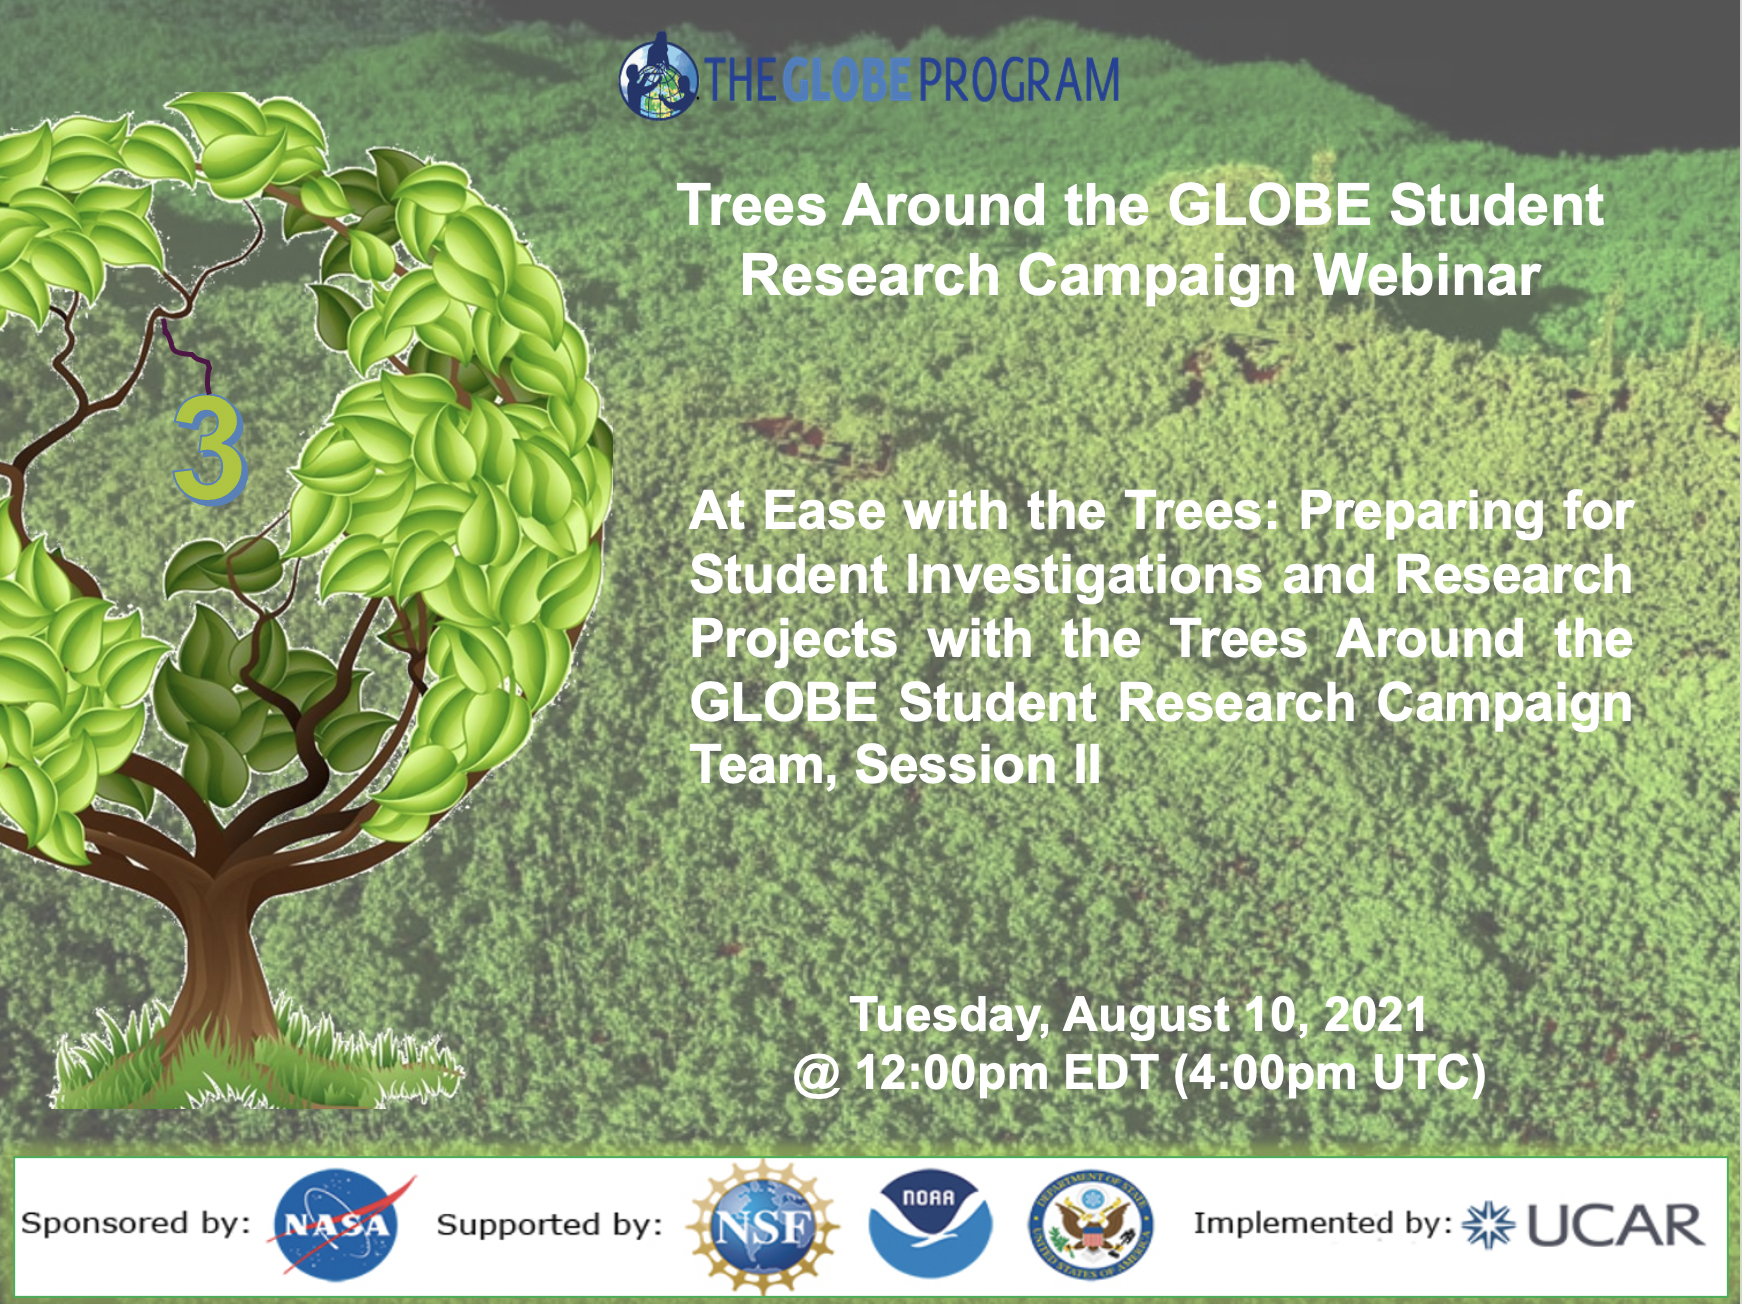 Trees Around the GLOBE 10 August webinar shareable, with a graphic of a tree and a photo of a tree-filled landscape in the background